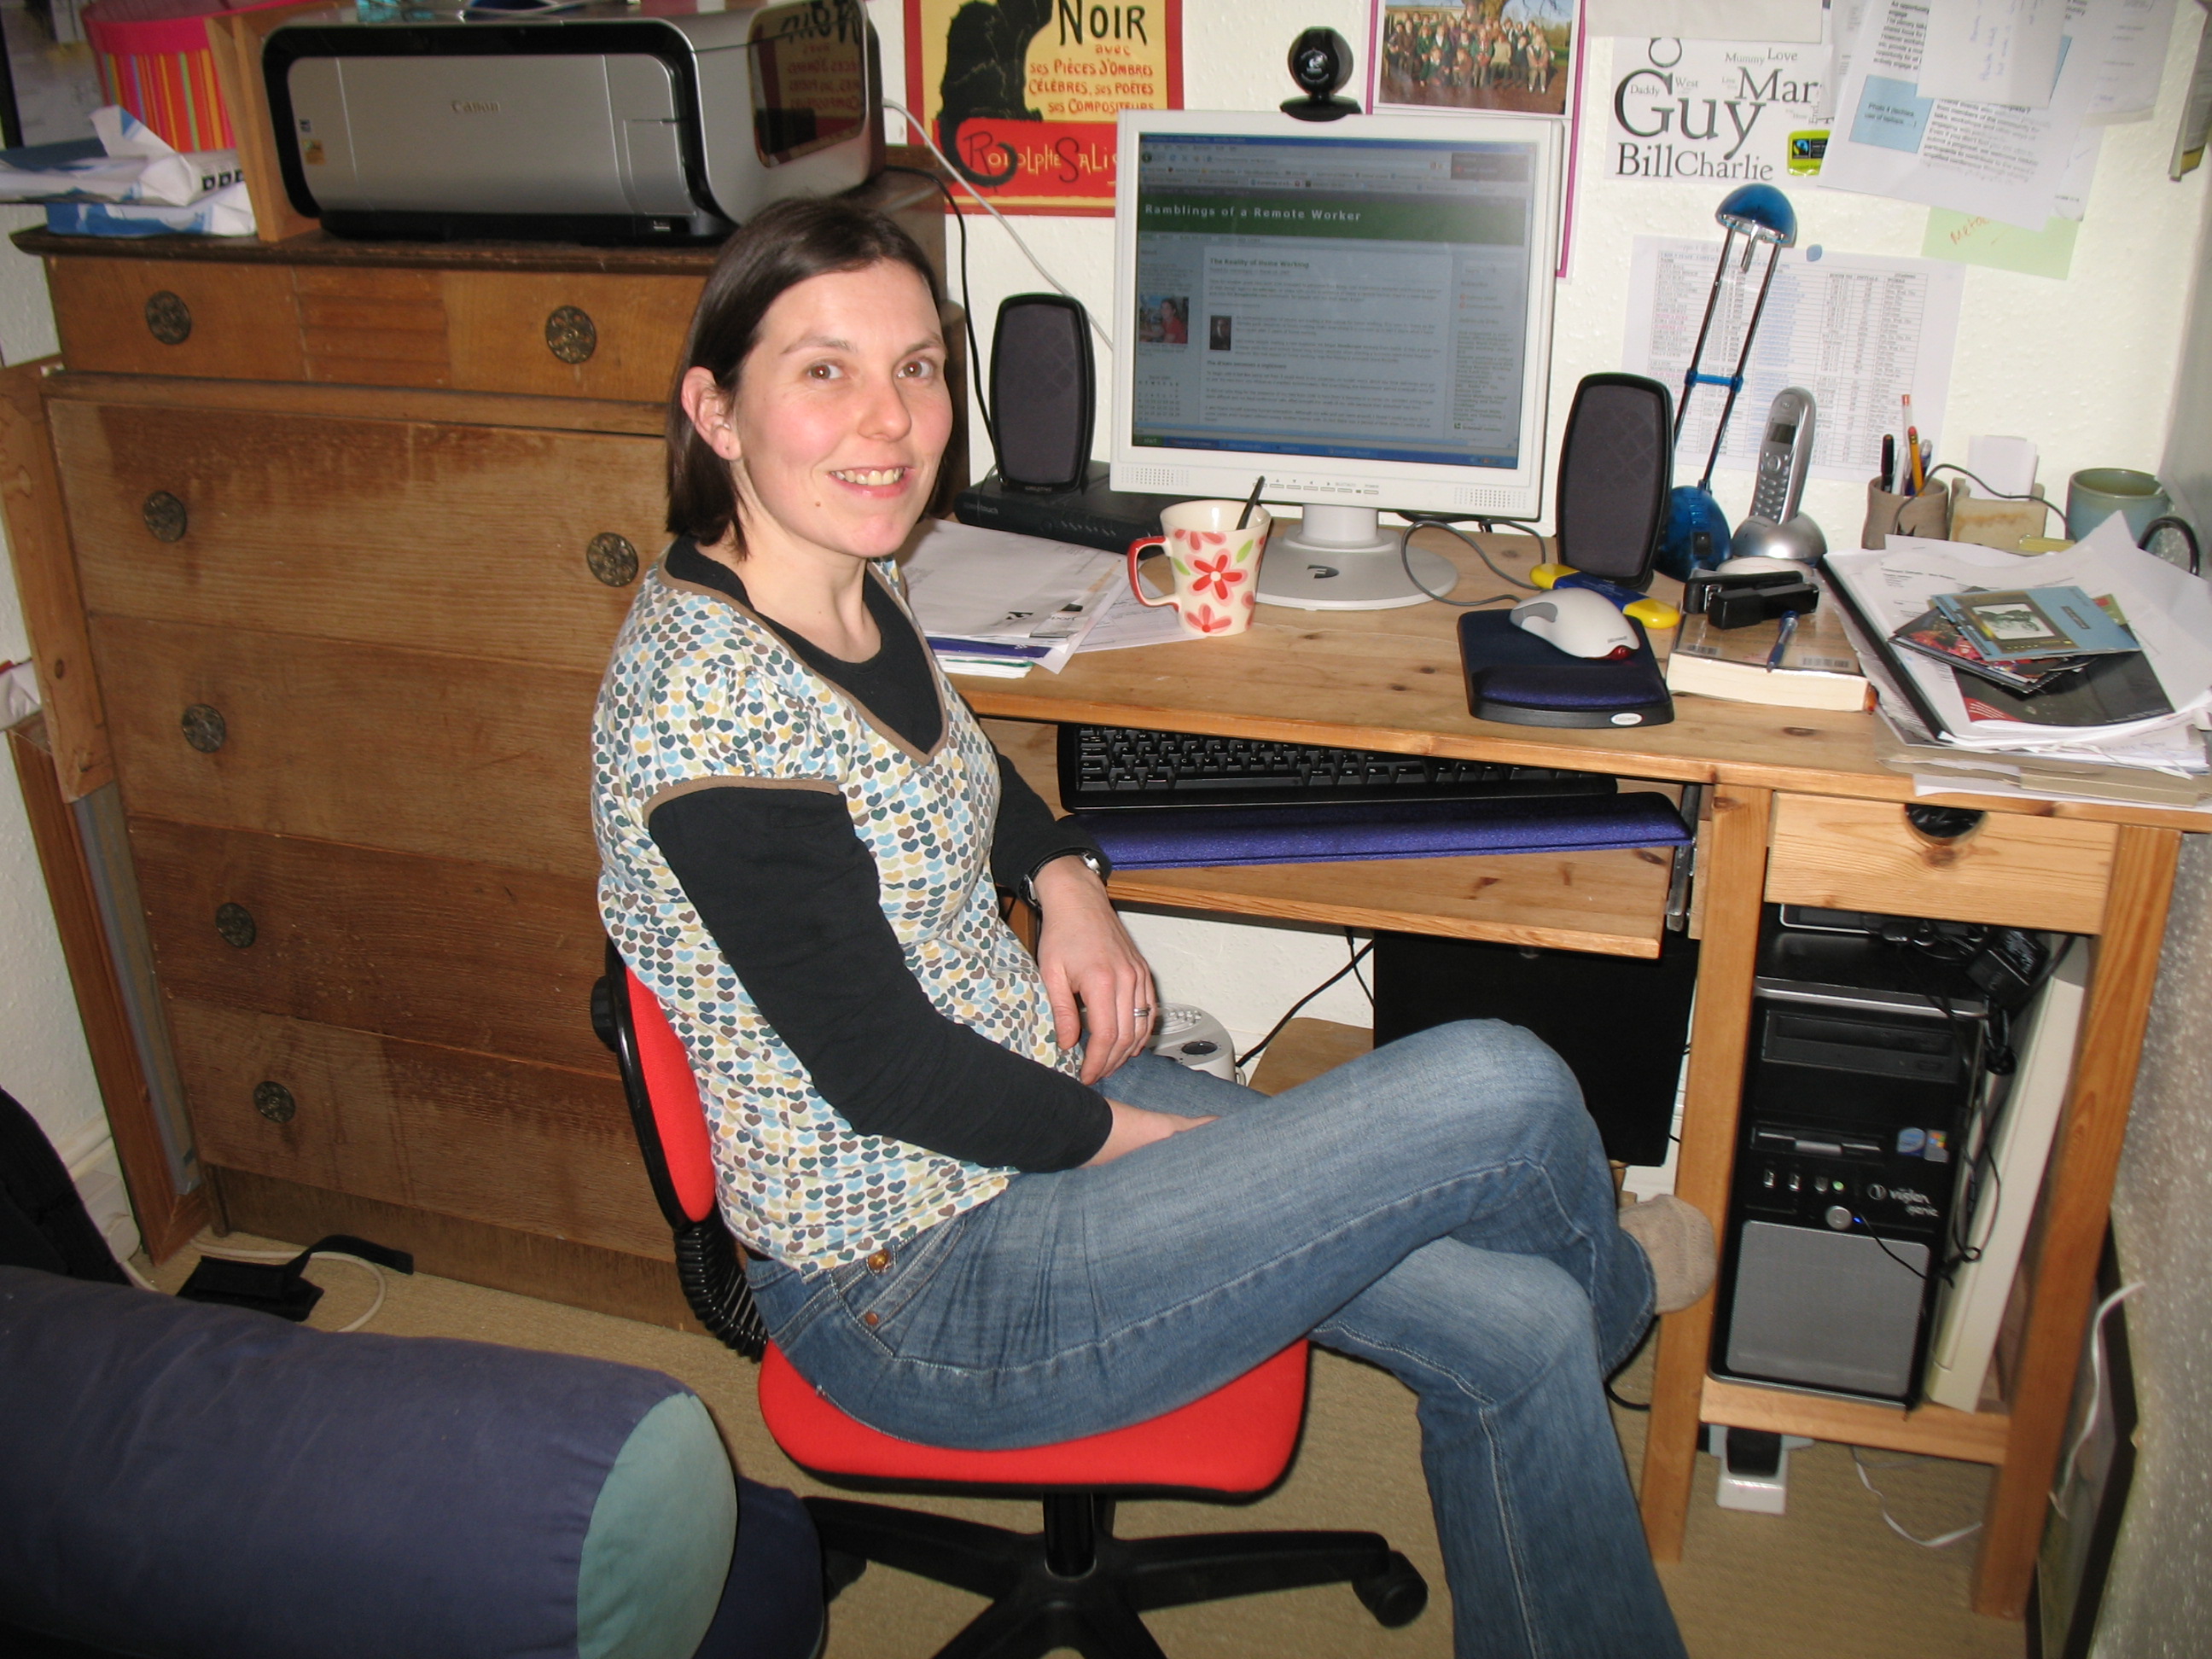 Me back in 2009 as a remote worker